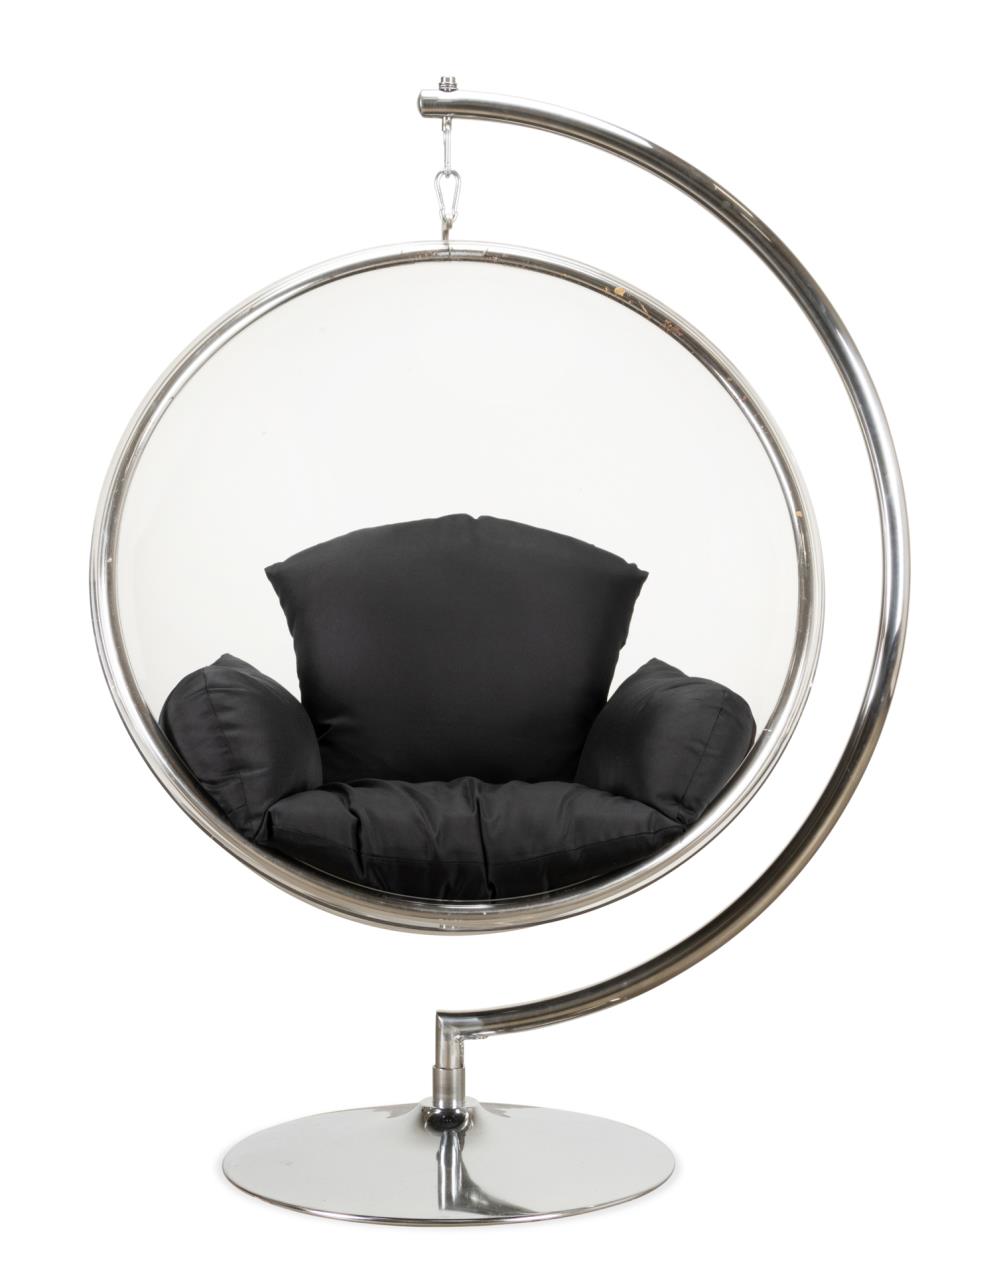 HANGING CLEAR ACRYLIC BUBBLE CHAIR 354db9